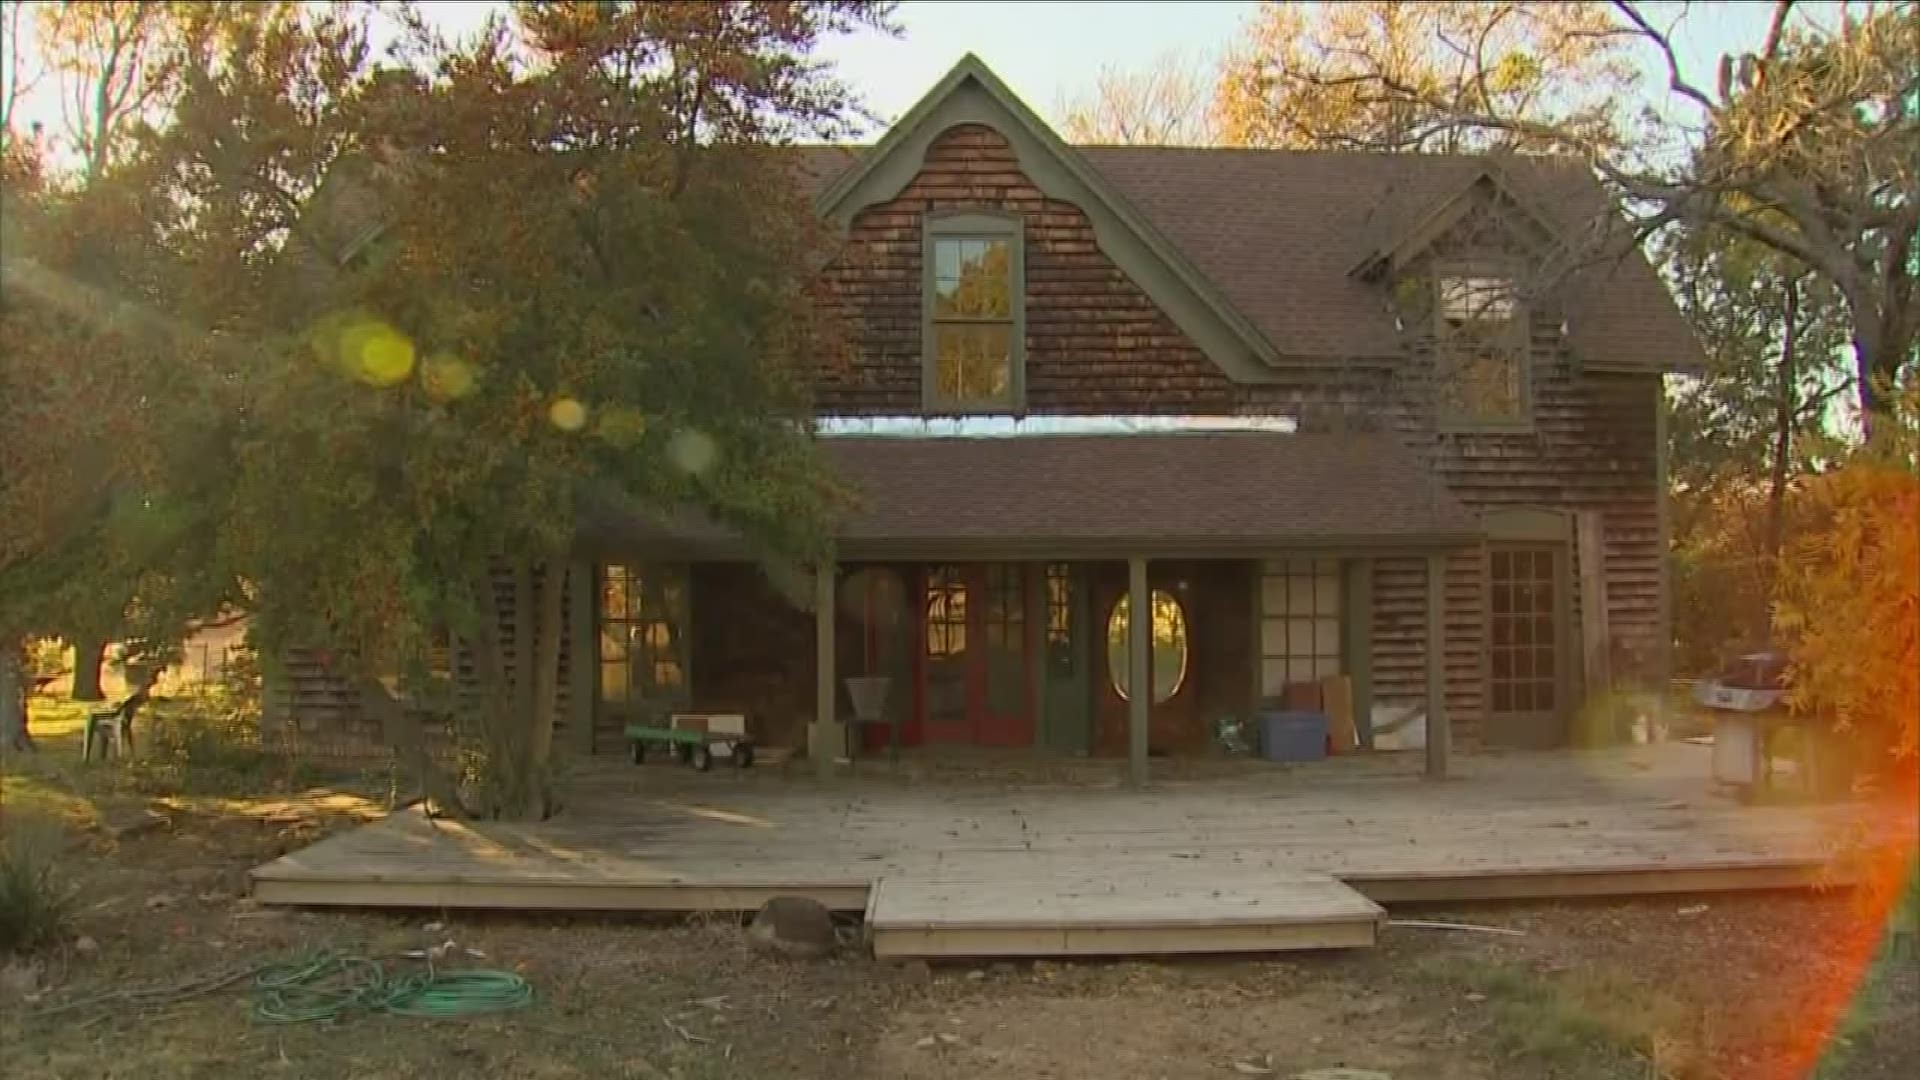 Fate of Plano's oldest house